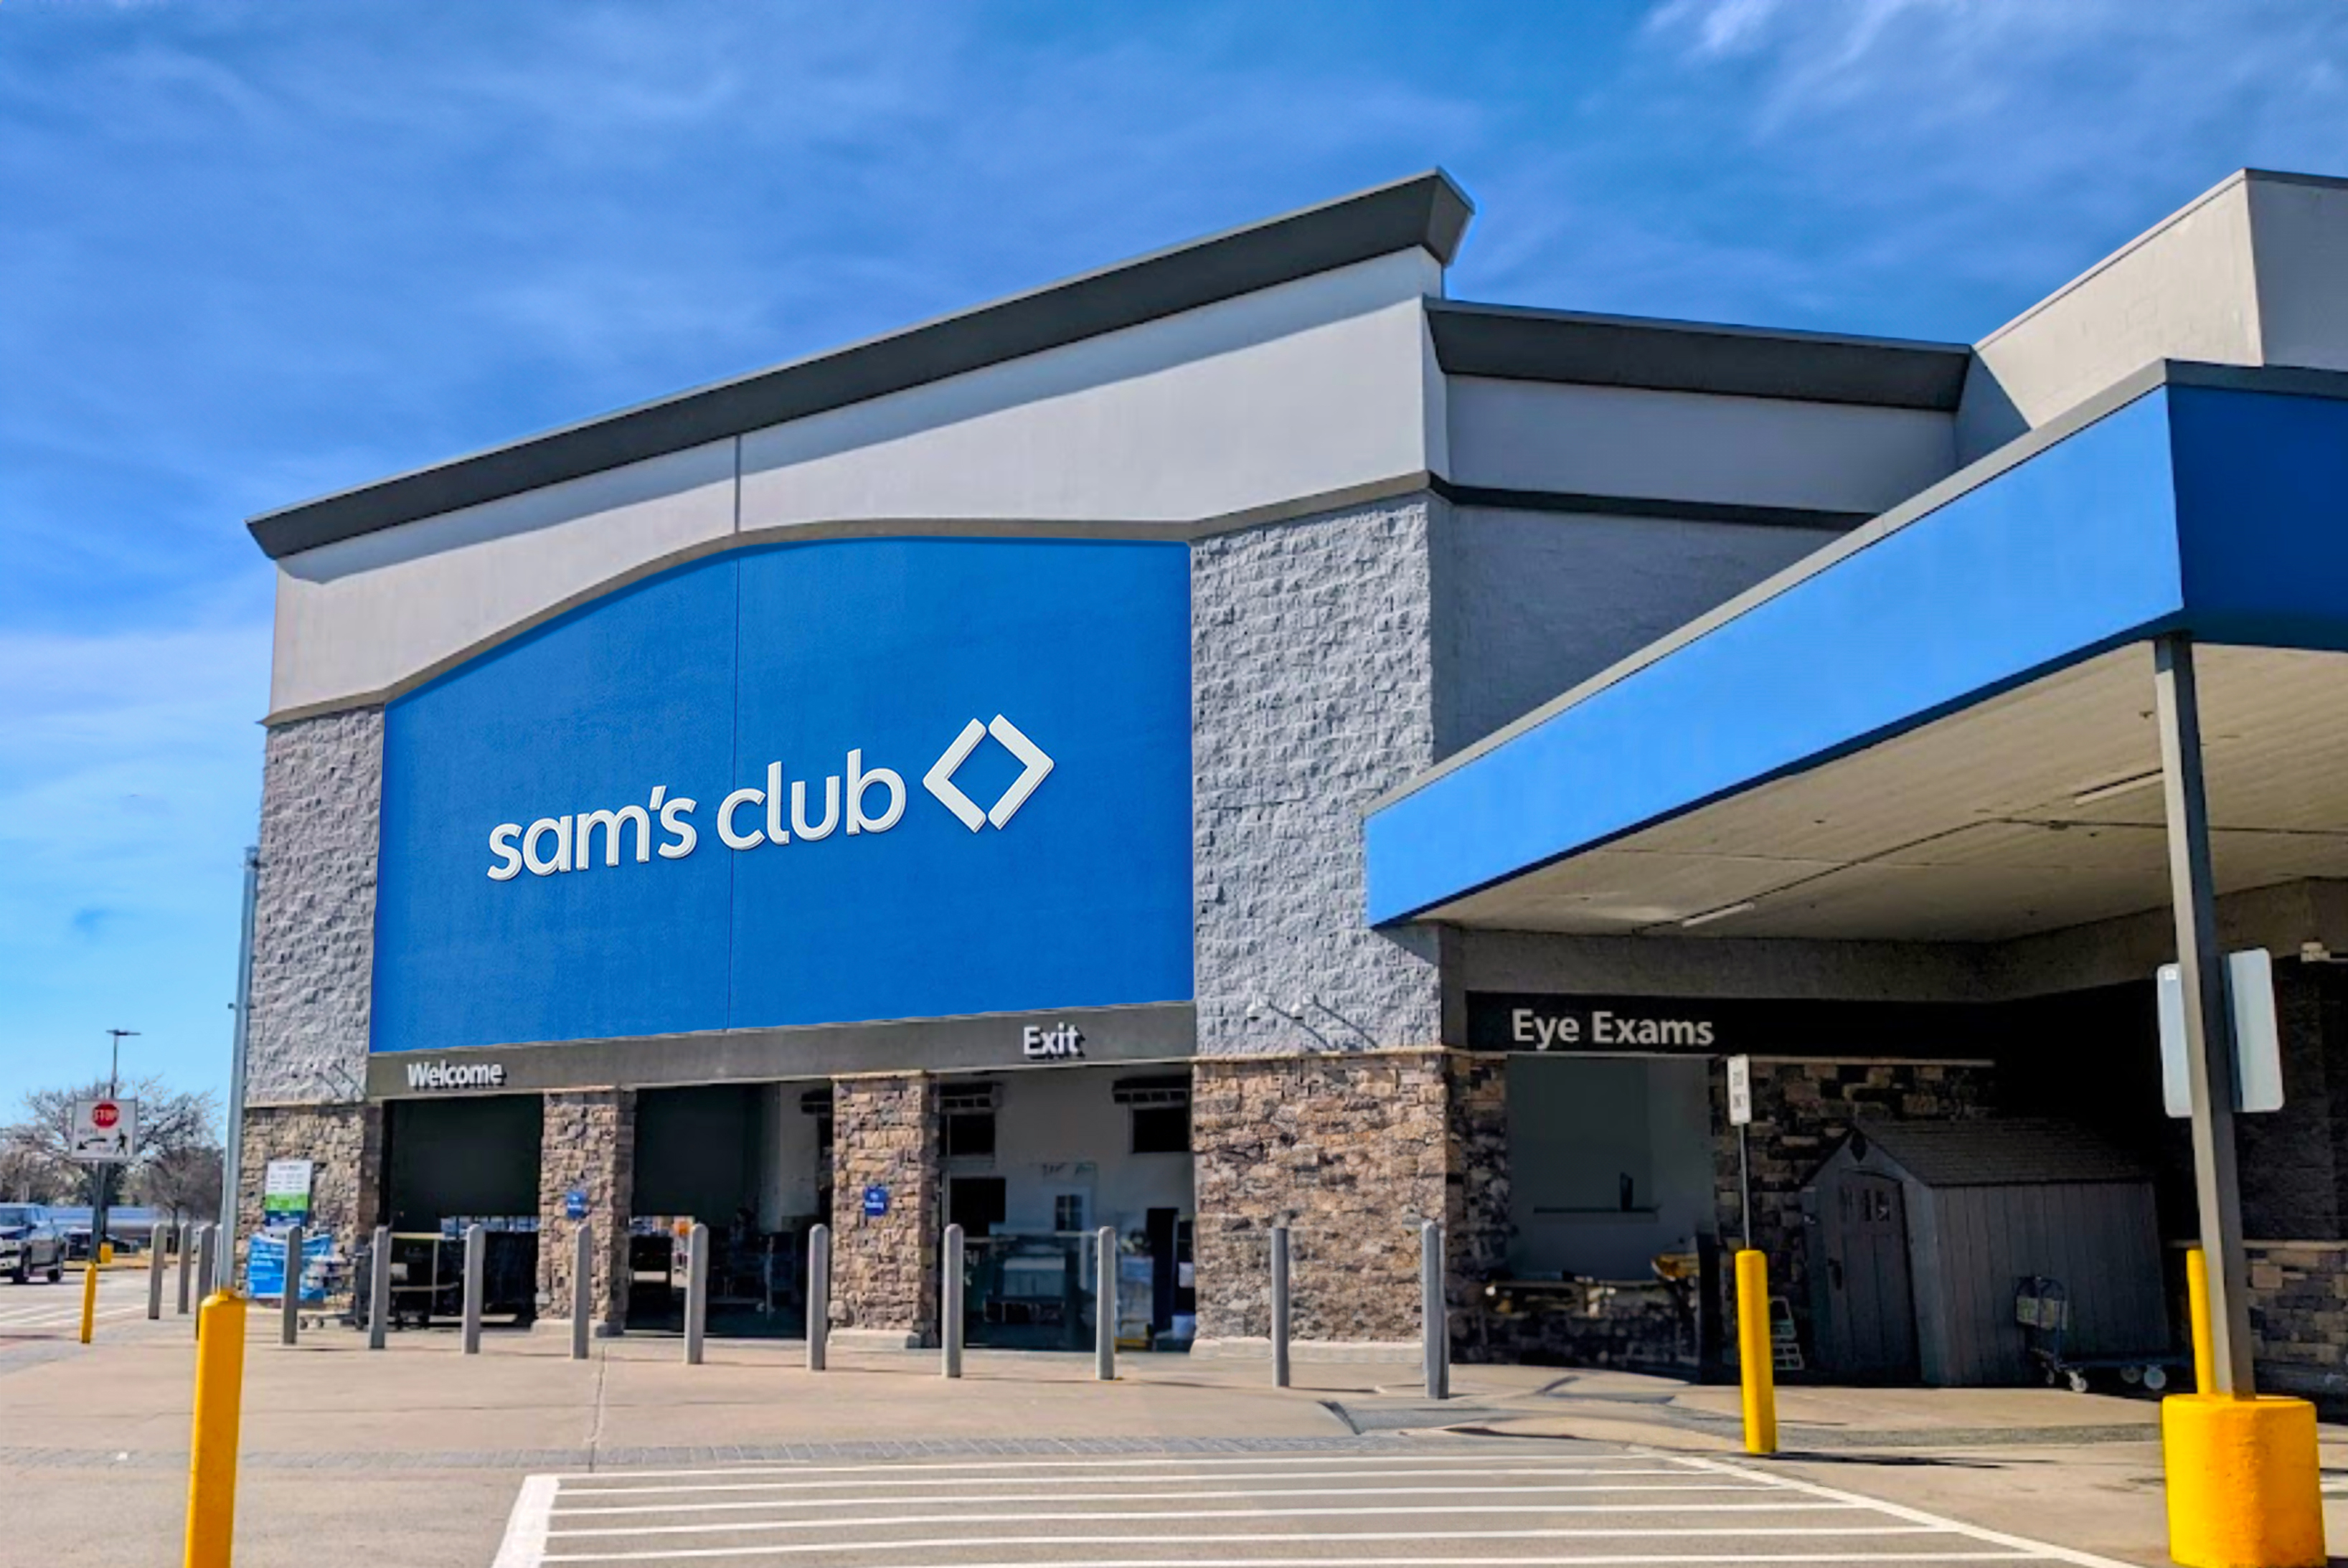 Sam's Club Announces Reopening in Grapevine, Texas